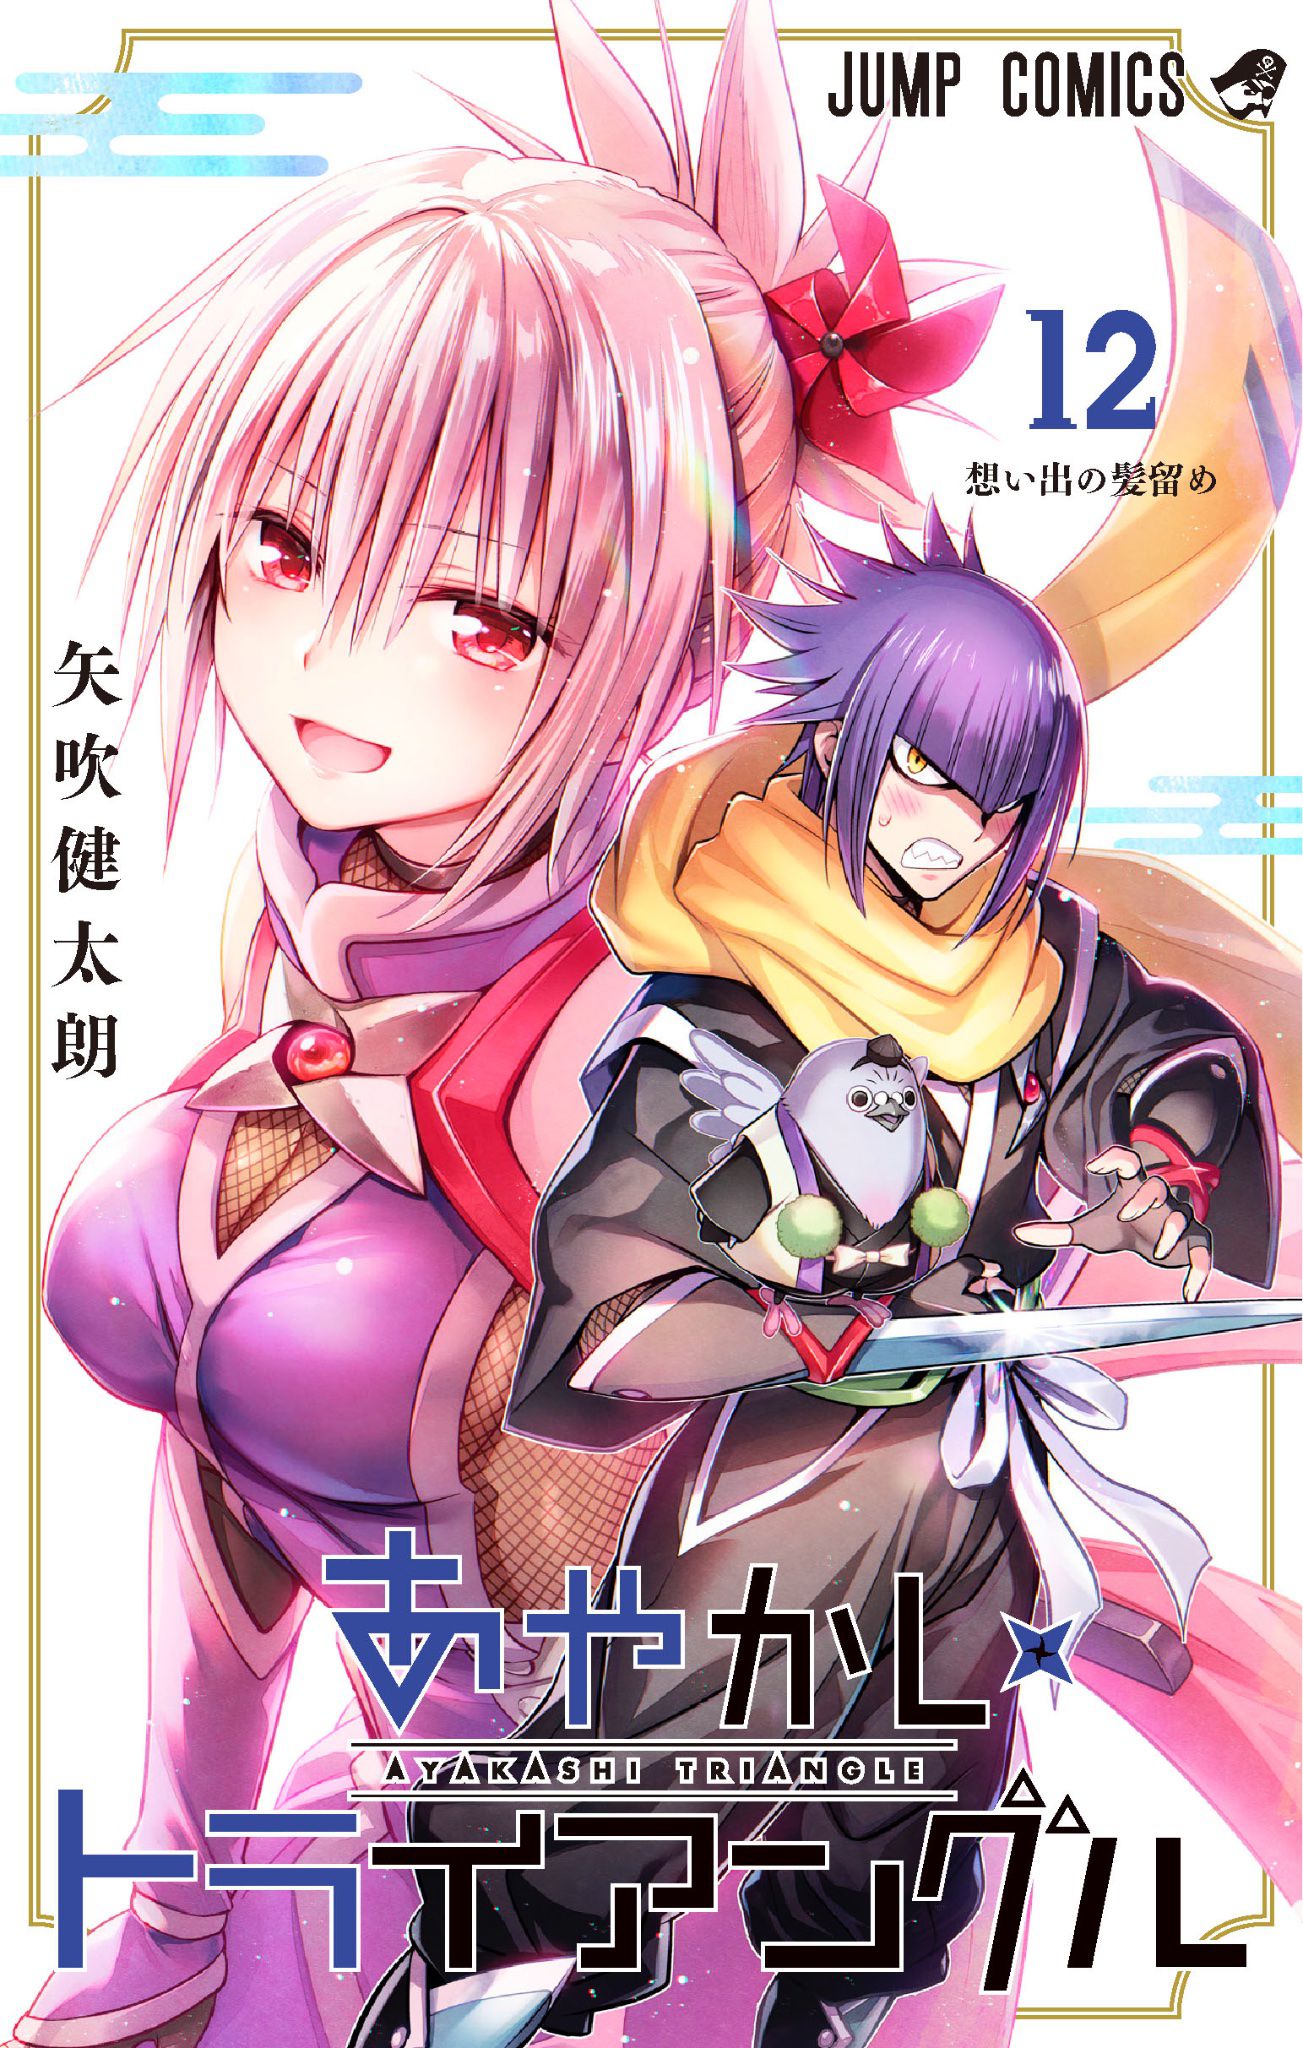 【Sad news】Reading through "ToLOVE", inadvertently exceeding the number of views of "Ayakashi Triangle" 8